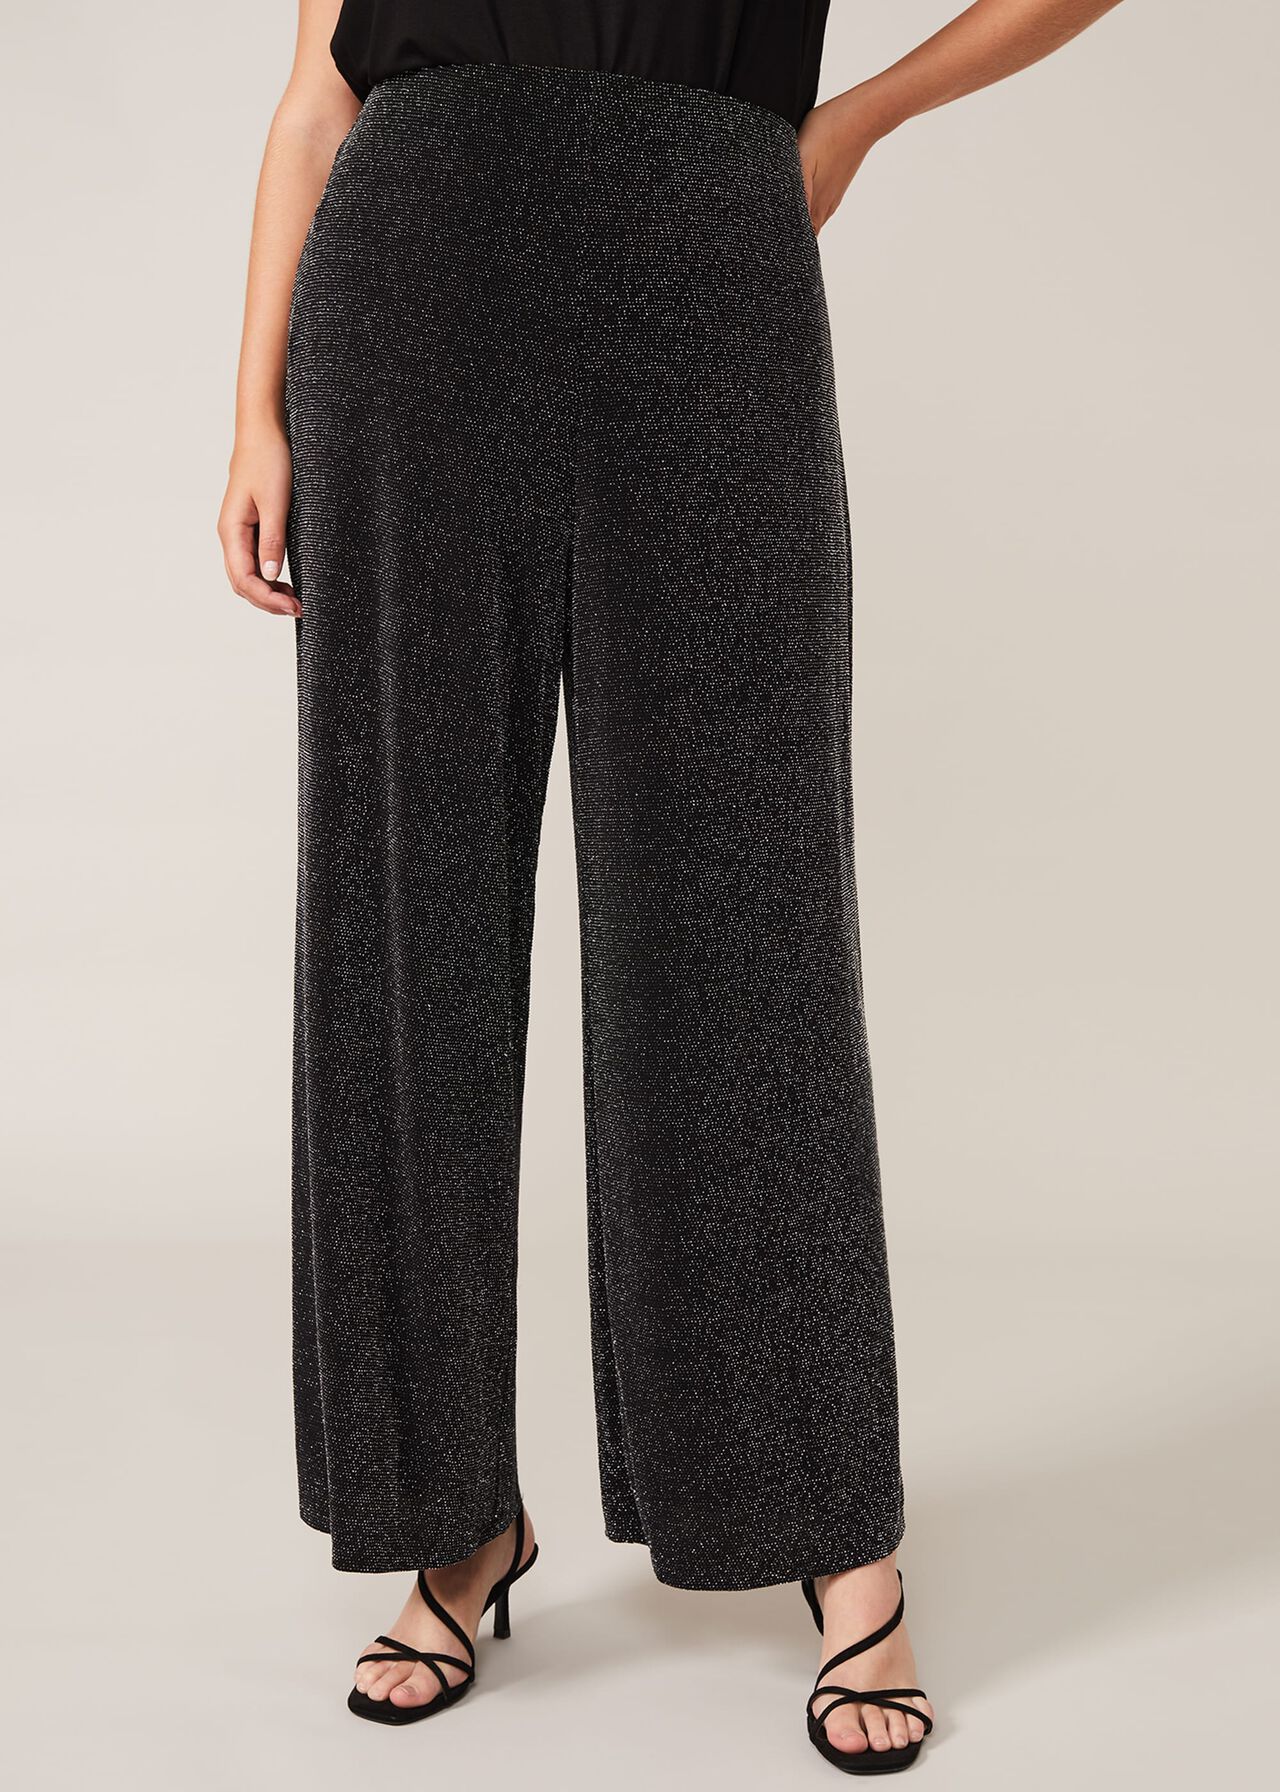 Corinne Sparkle Trousers